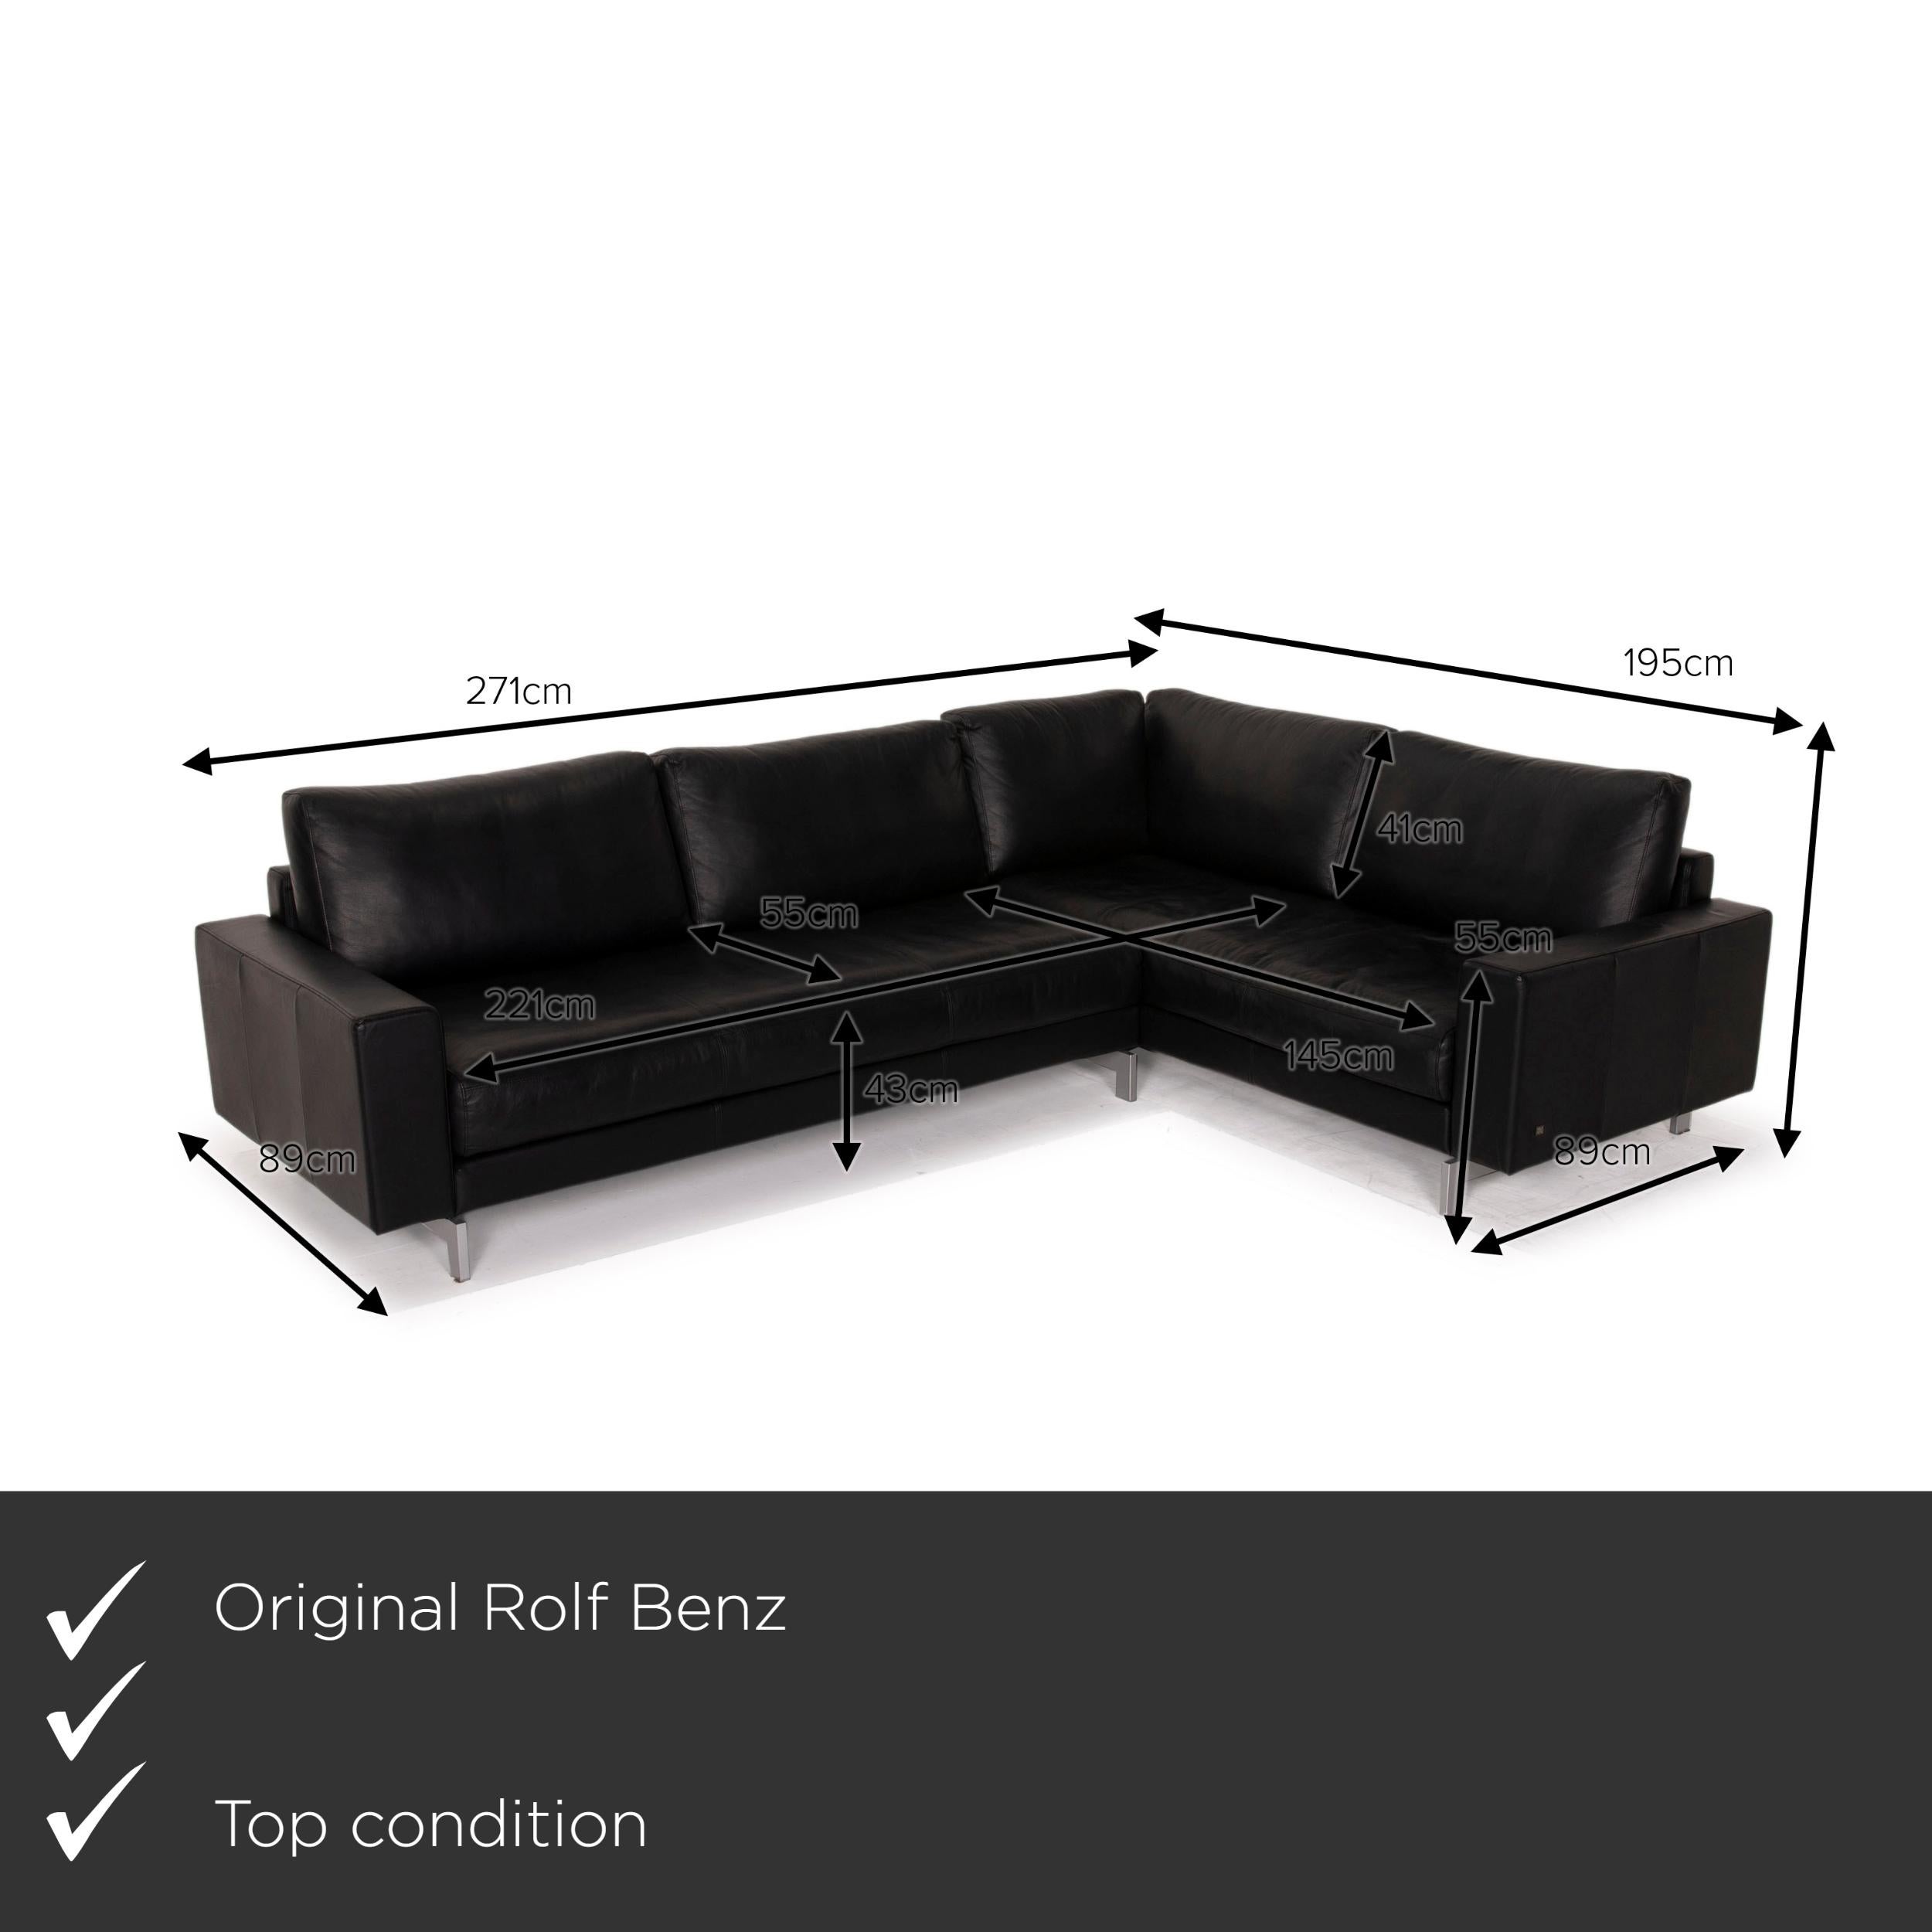 We present to you a Rolf Benz Vida leather sofa black corner sofa.
 

 Product measurements in centimeters:
 

Depth: 89
Width: 271
Height: 83
Seat height: 43
Rest height: 55
Seat depth: 55
Seat width: 221
Back height: 41.
 